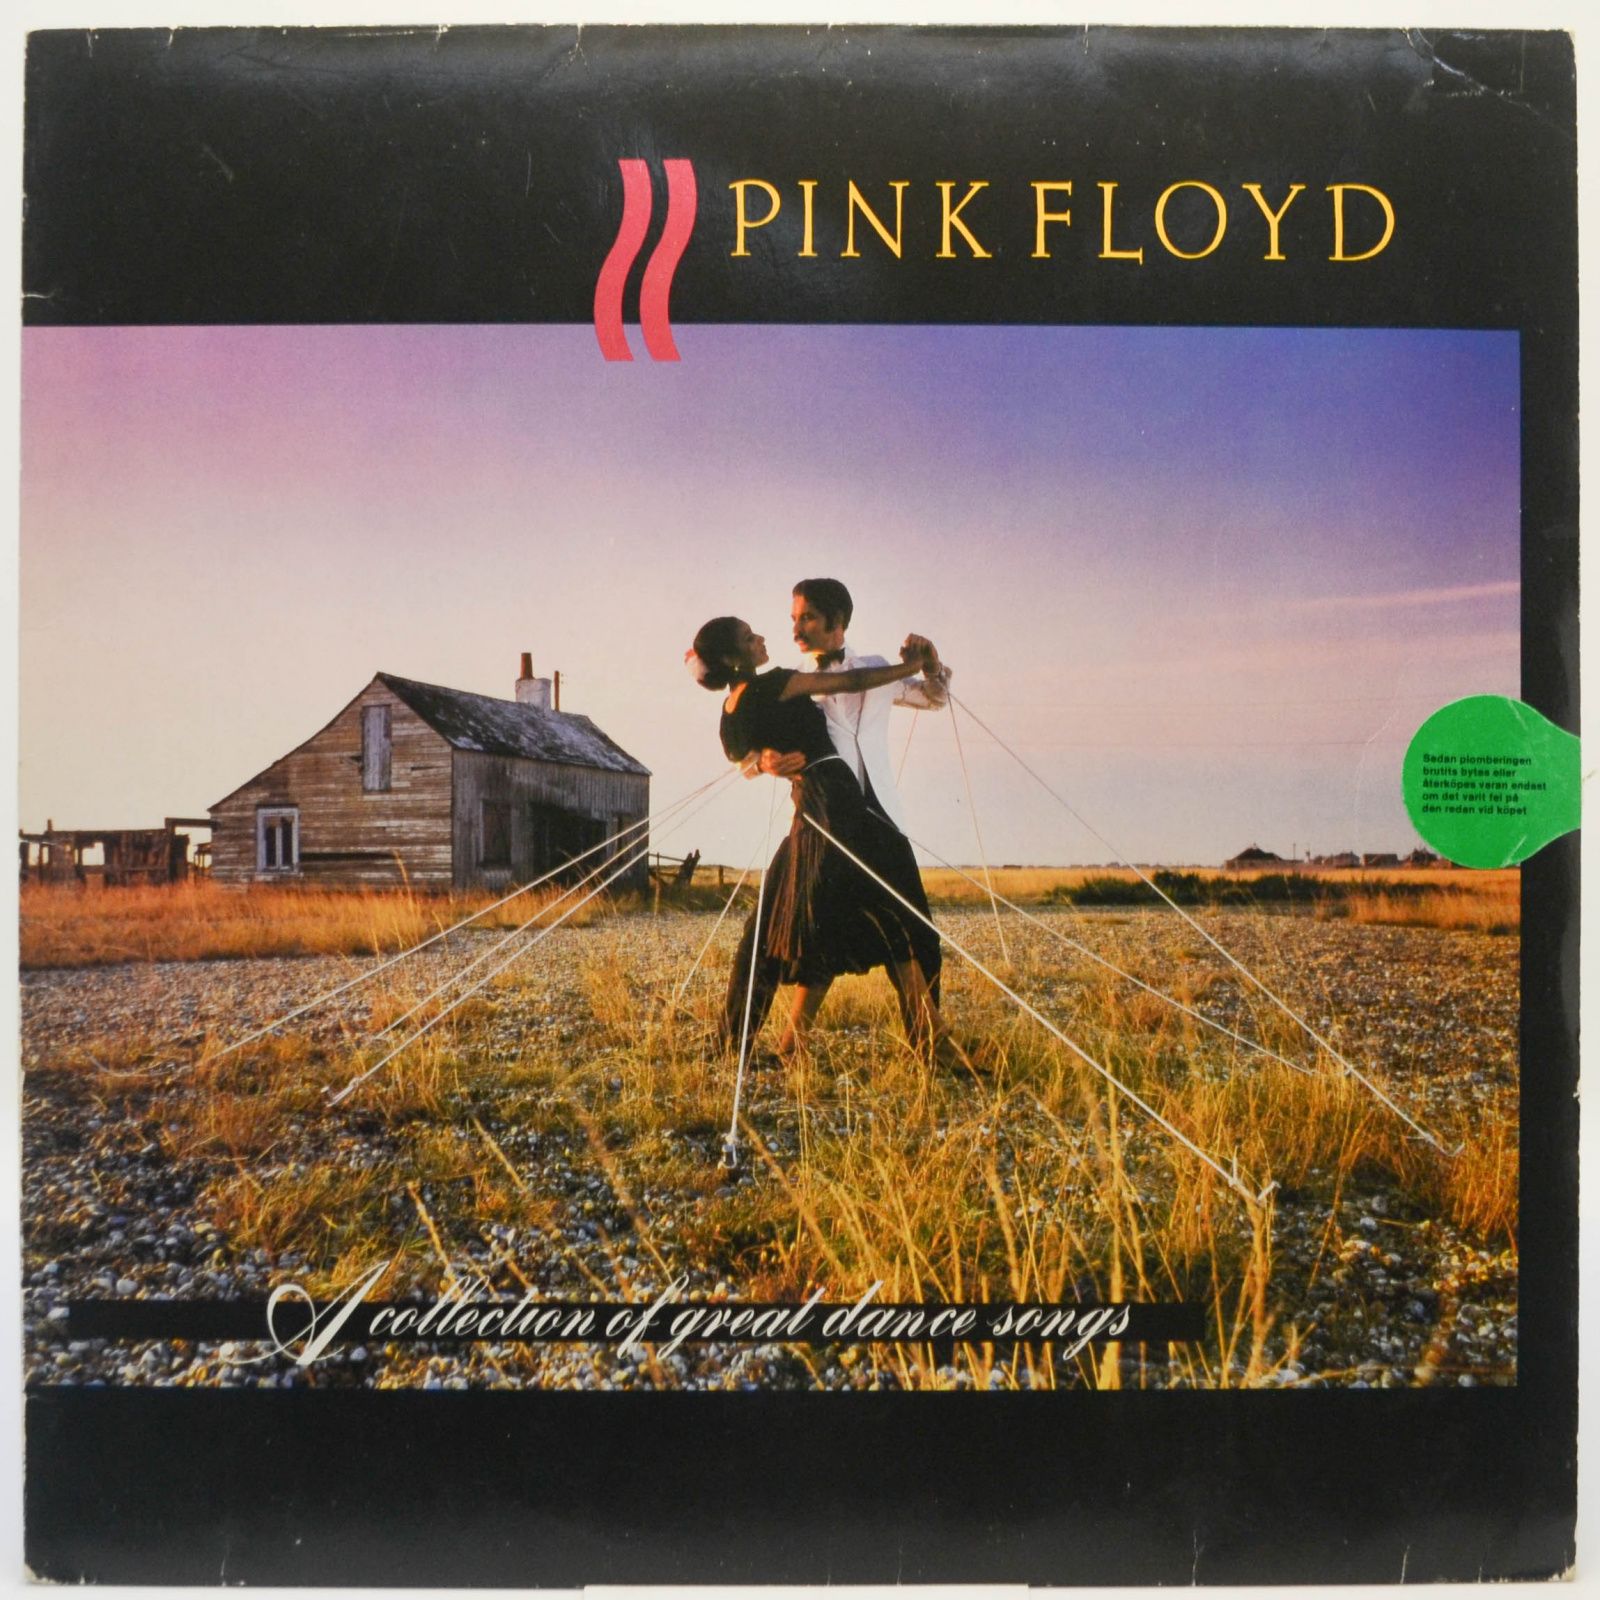 Pink Floyd — A Collection Of Great Dance Songs, 1981